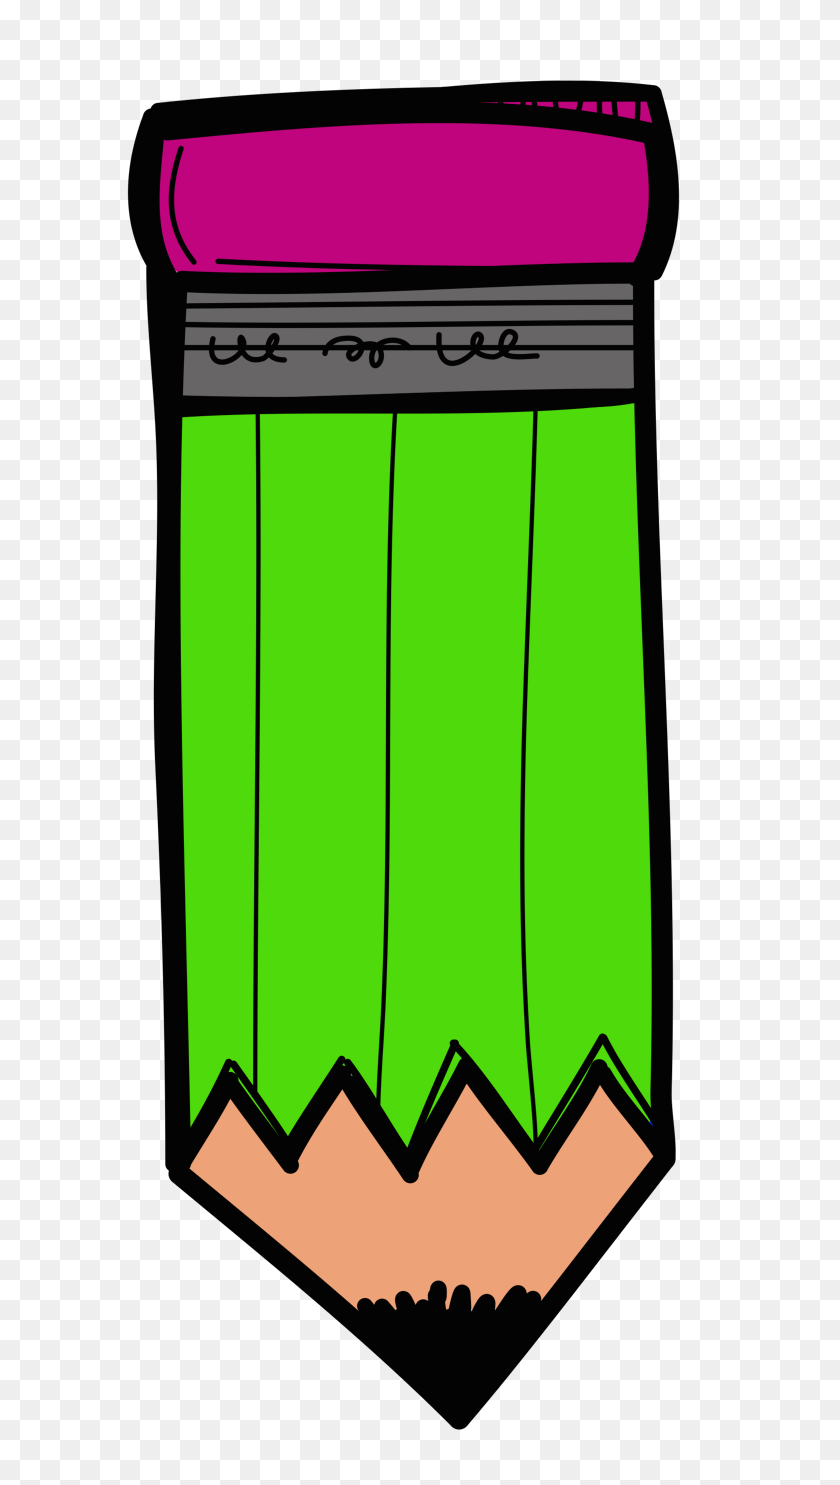 721x1425 Creative Pencil, Color Green Pencil Great Idea To Color Code Your - Box Of Crayons Clipart